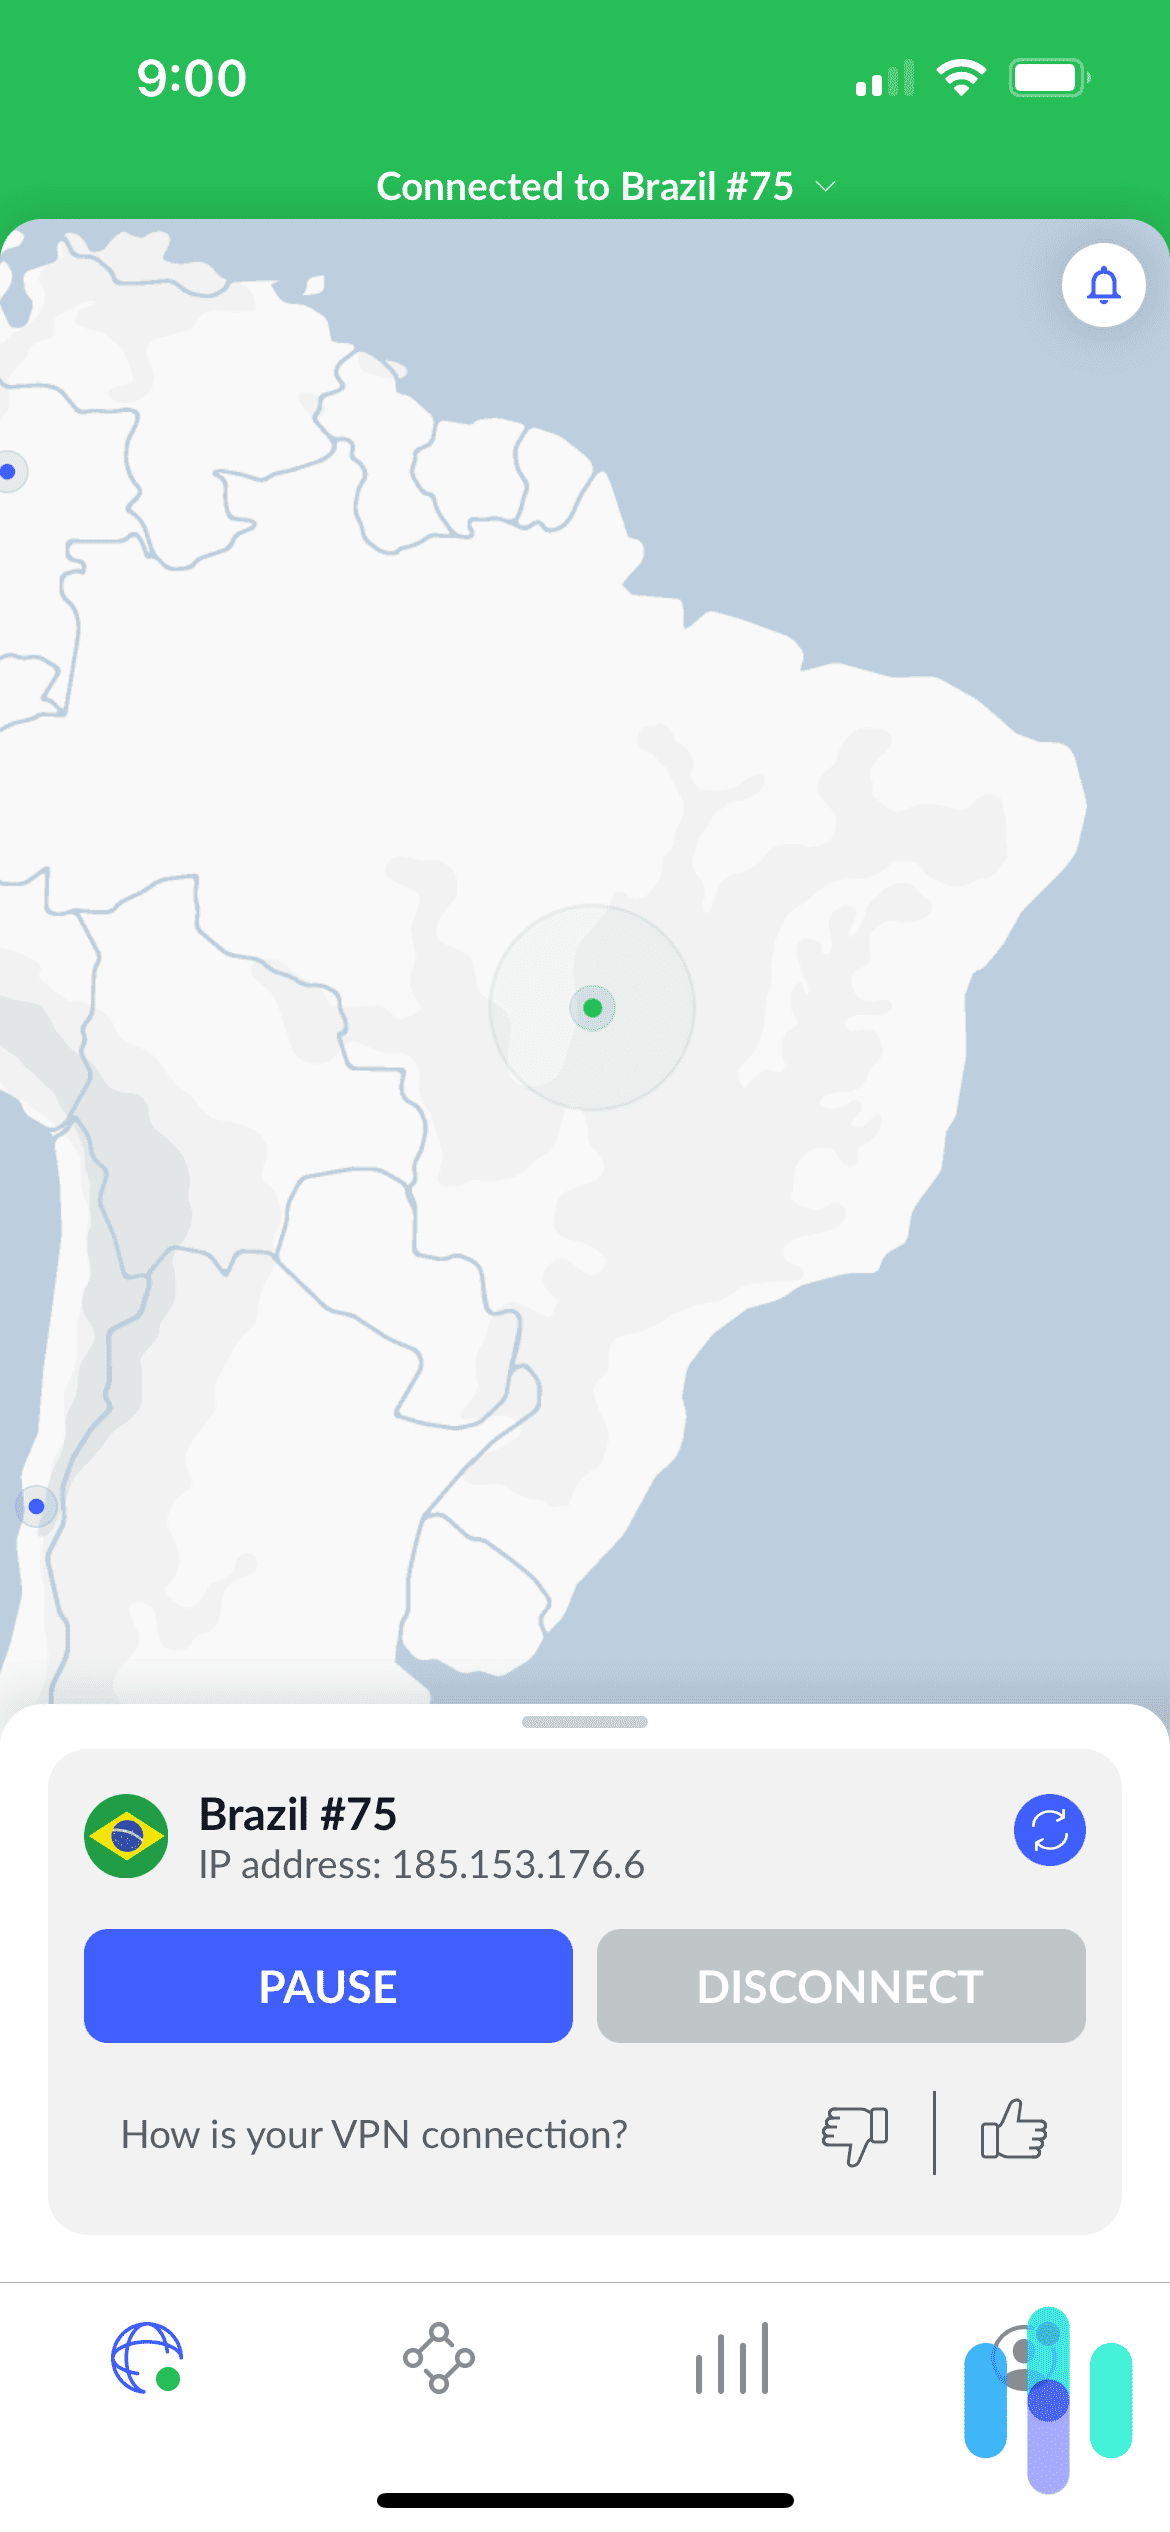 NordVPN connected to Brazil on iPhone